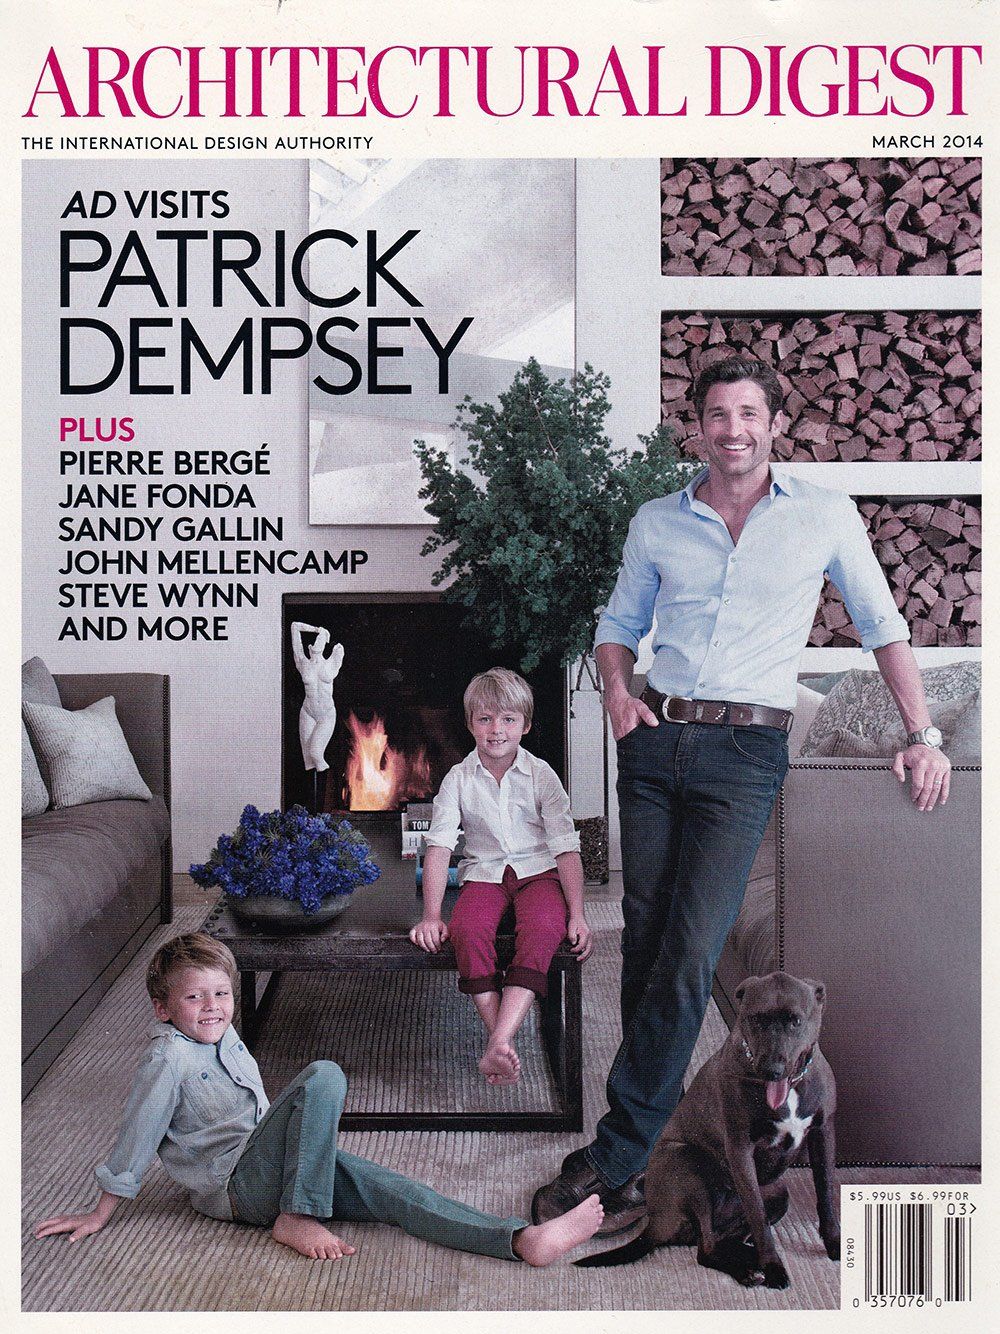 Architectural Digest: AD Visits Patrick Dempsey